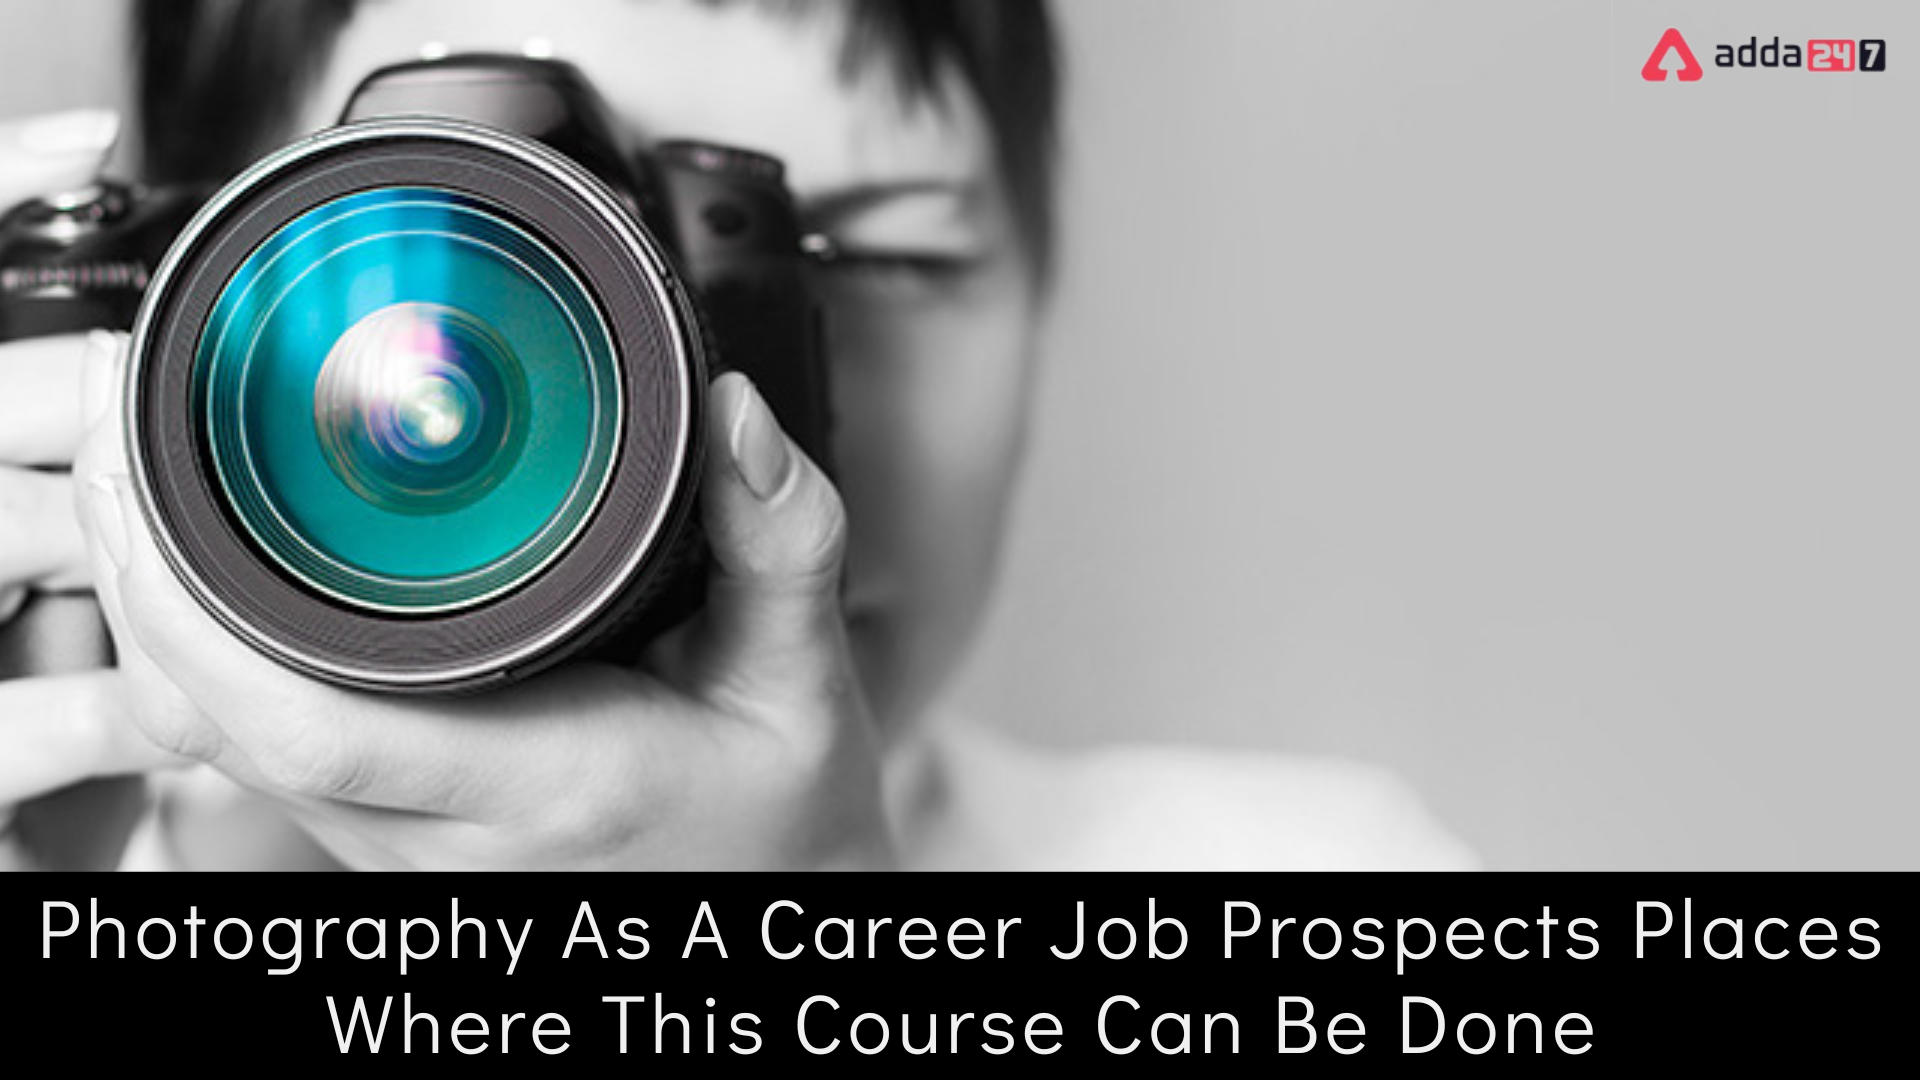 Photography As A Career Job Prospects Places Where This Course Can Be Done